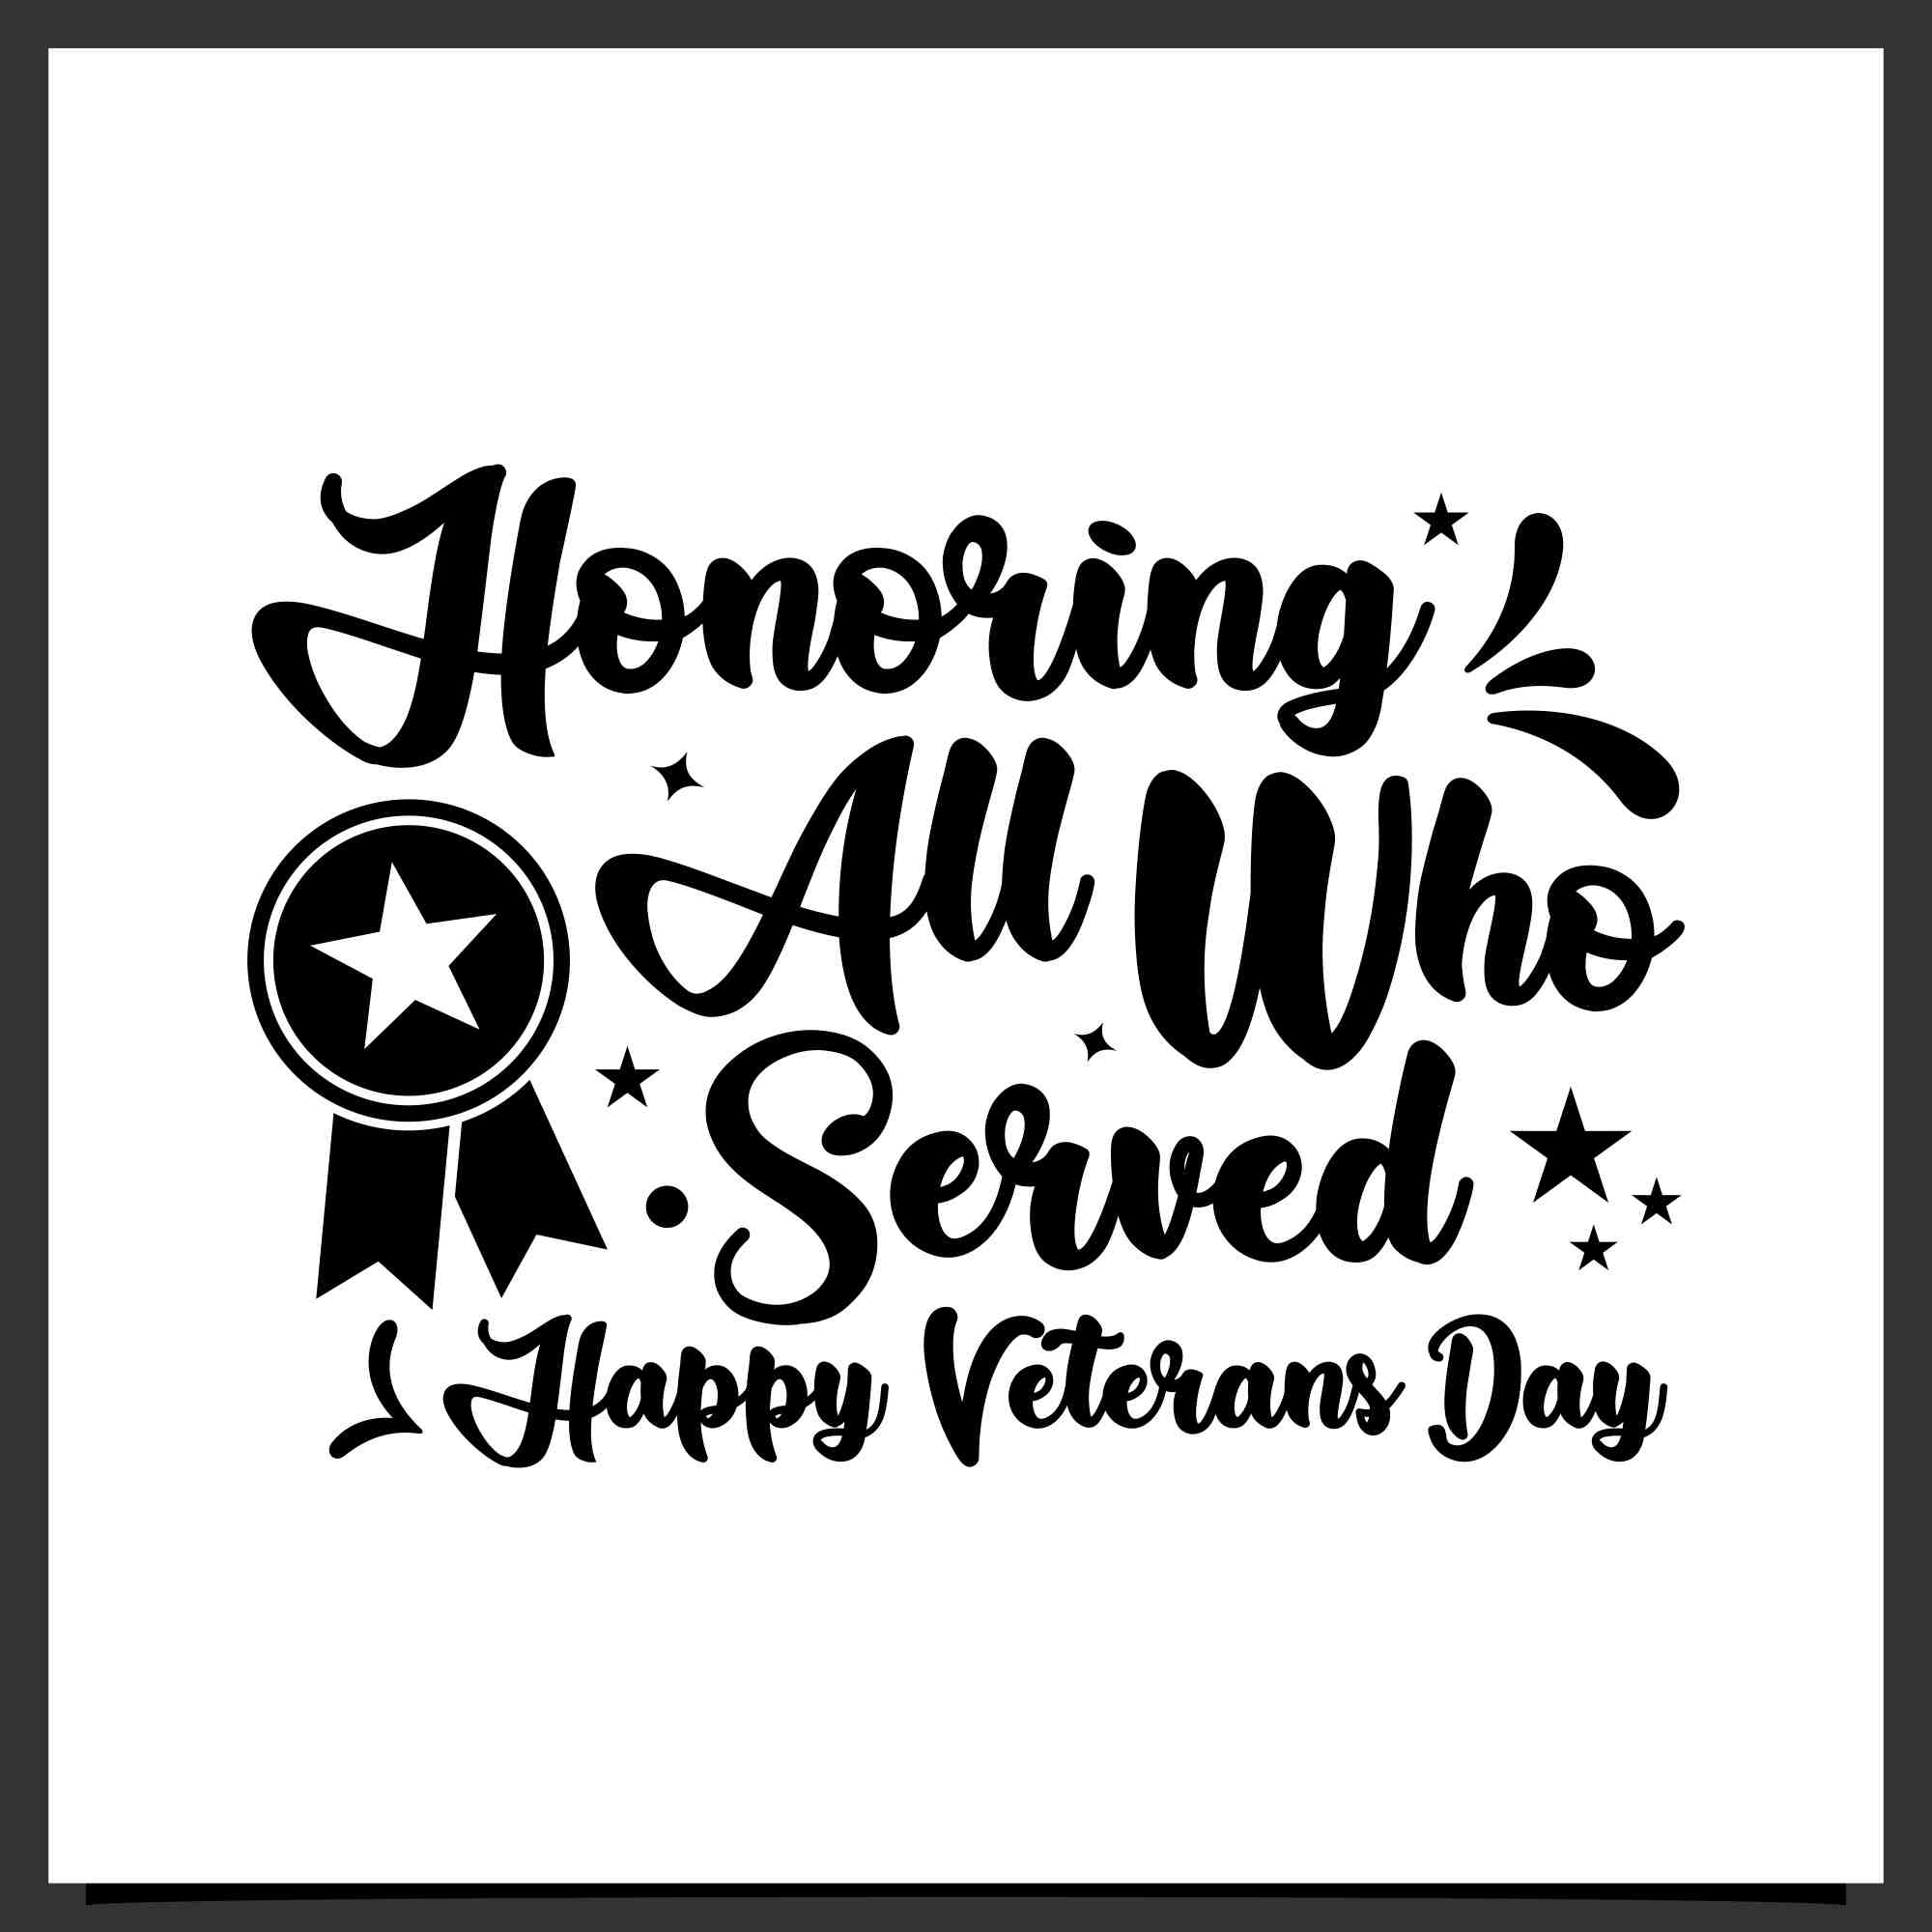 Set Veteran day lettering design collection - $5 preview image.